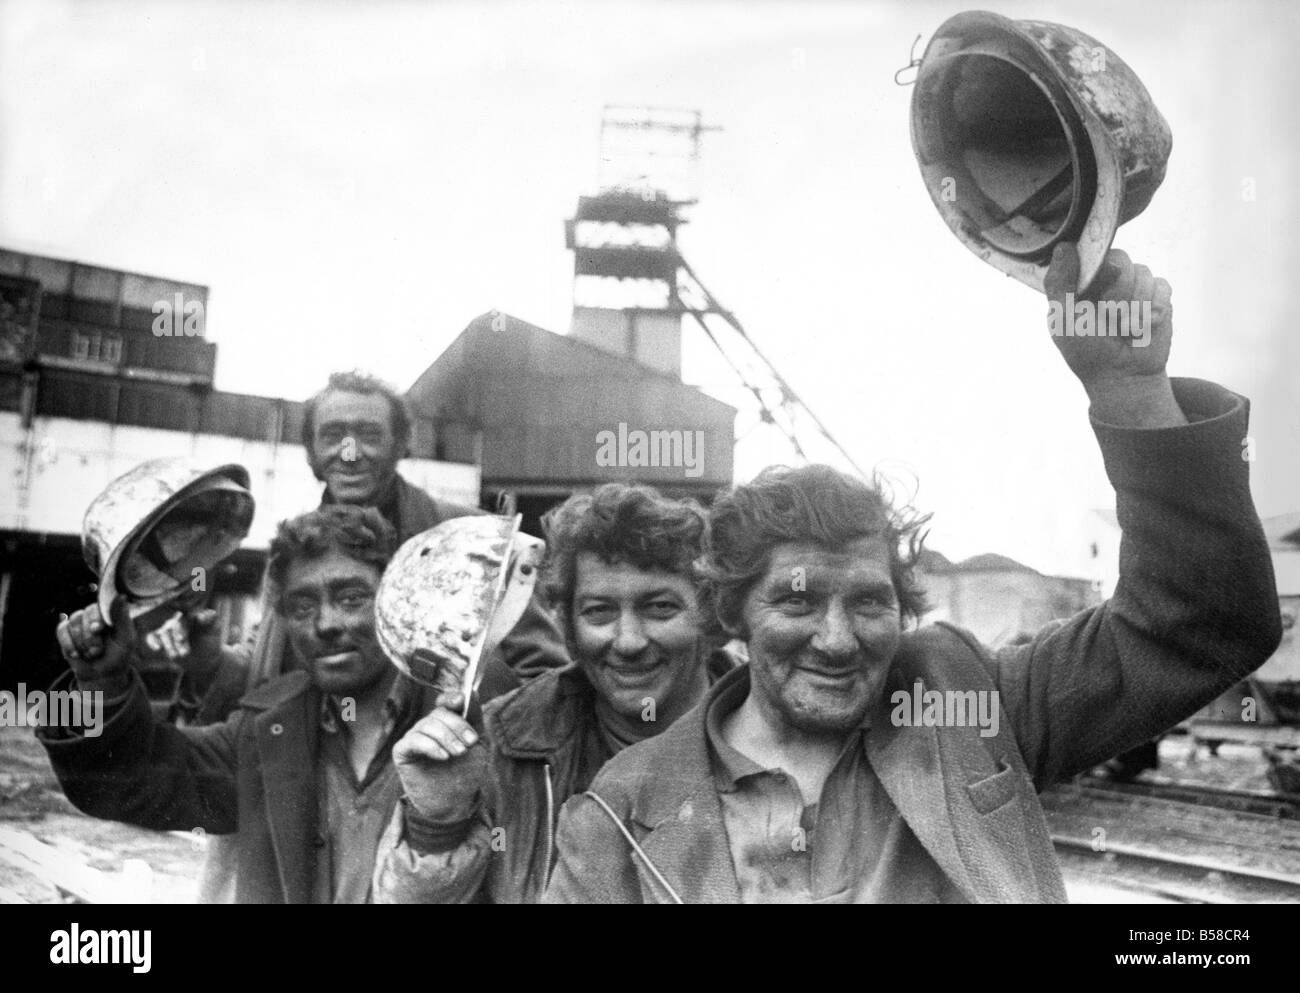 Hats off to victory as Miners Jimmy Cairns and Jow Davis at East Hetton Colliery celebrate their record breaking output it was the highest in its 140 year history Stock Photo